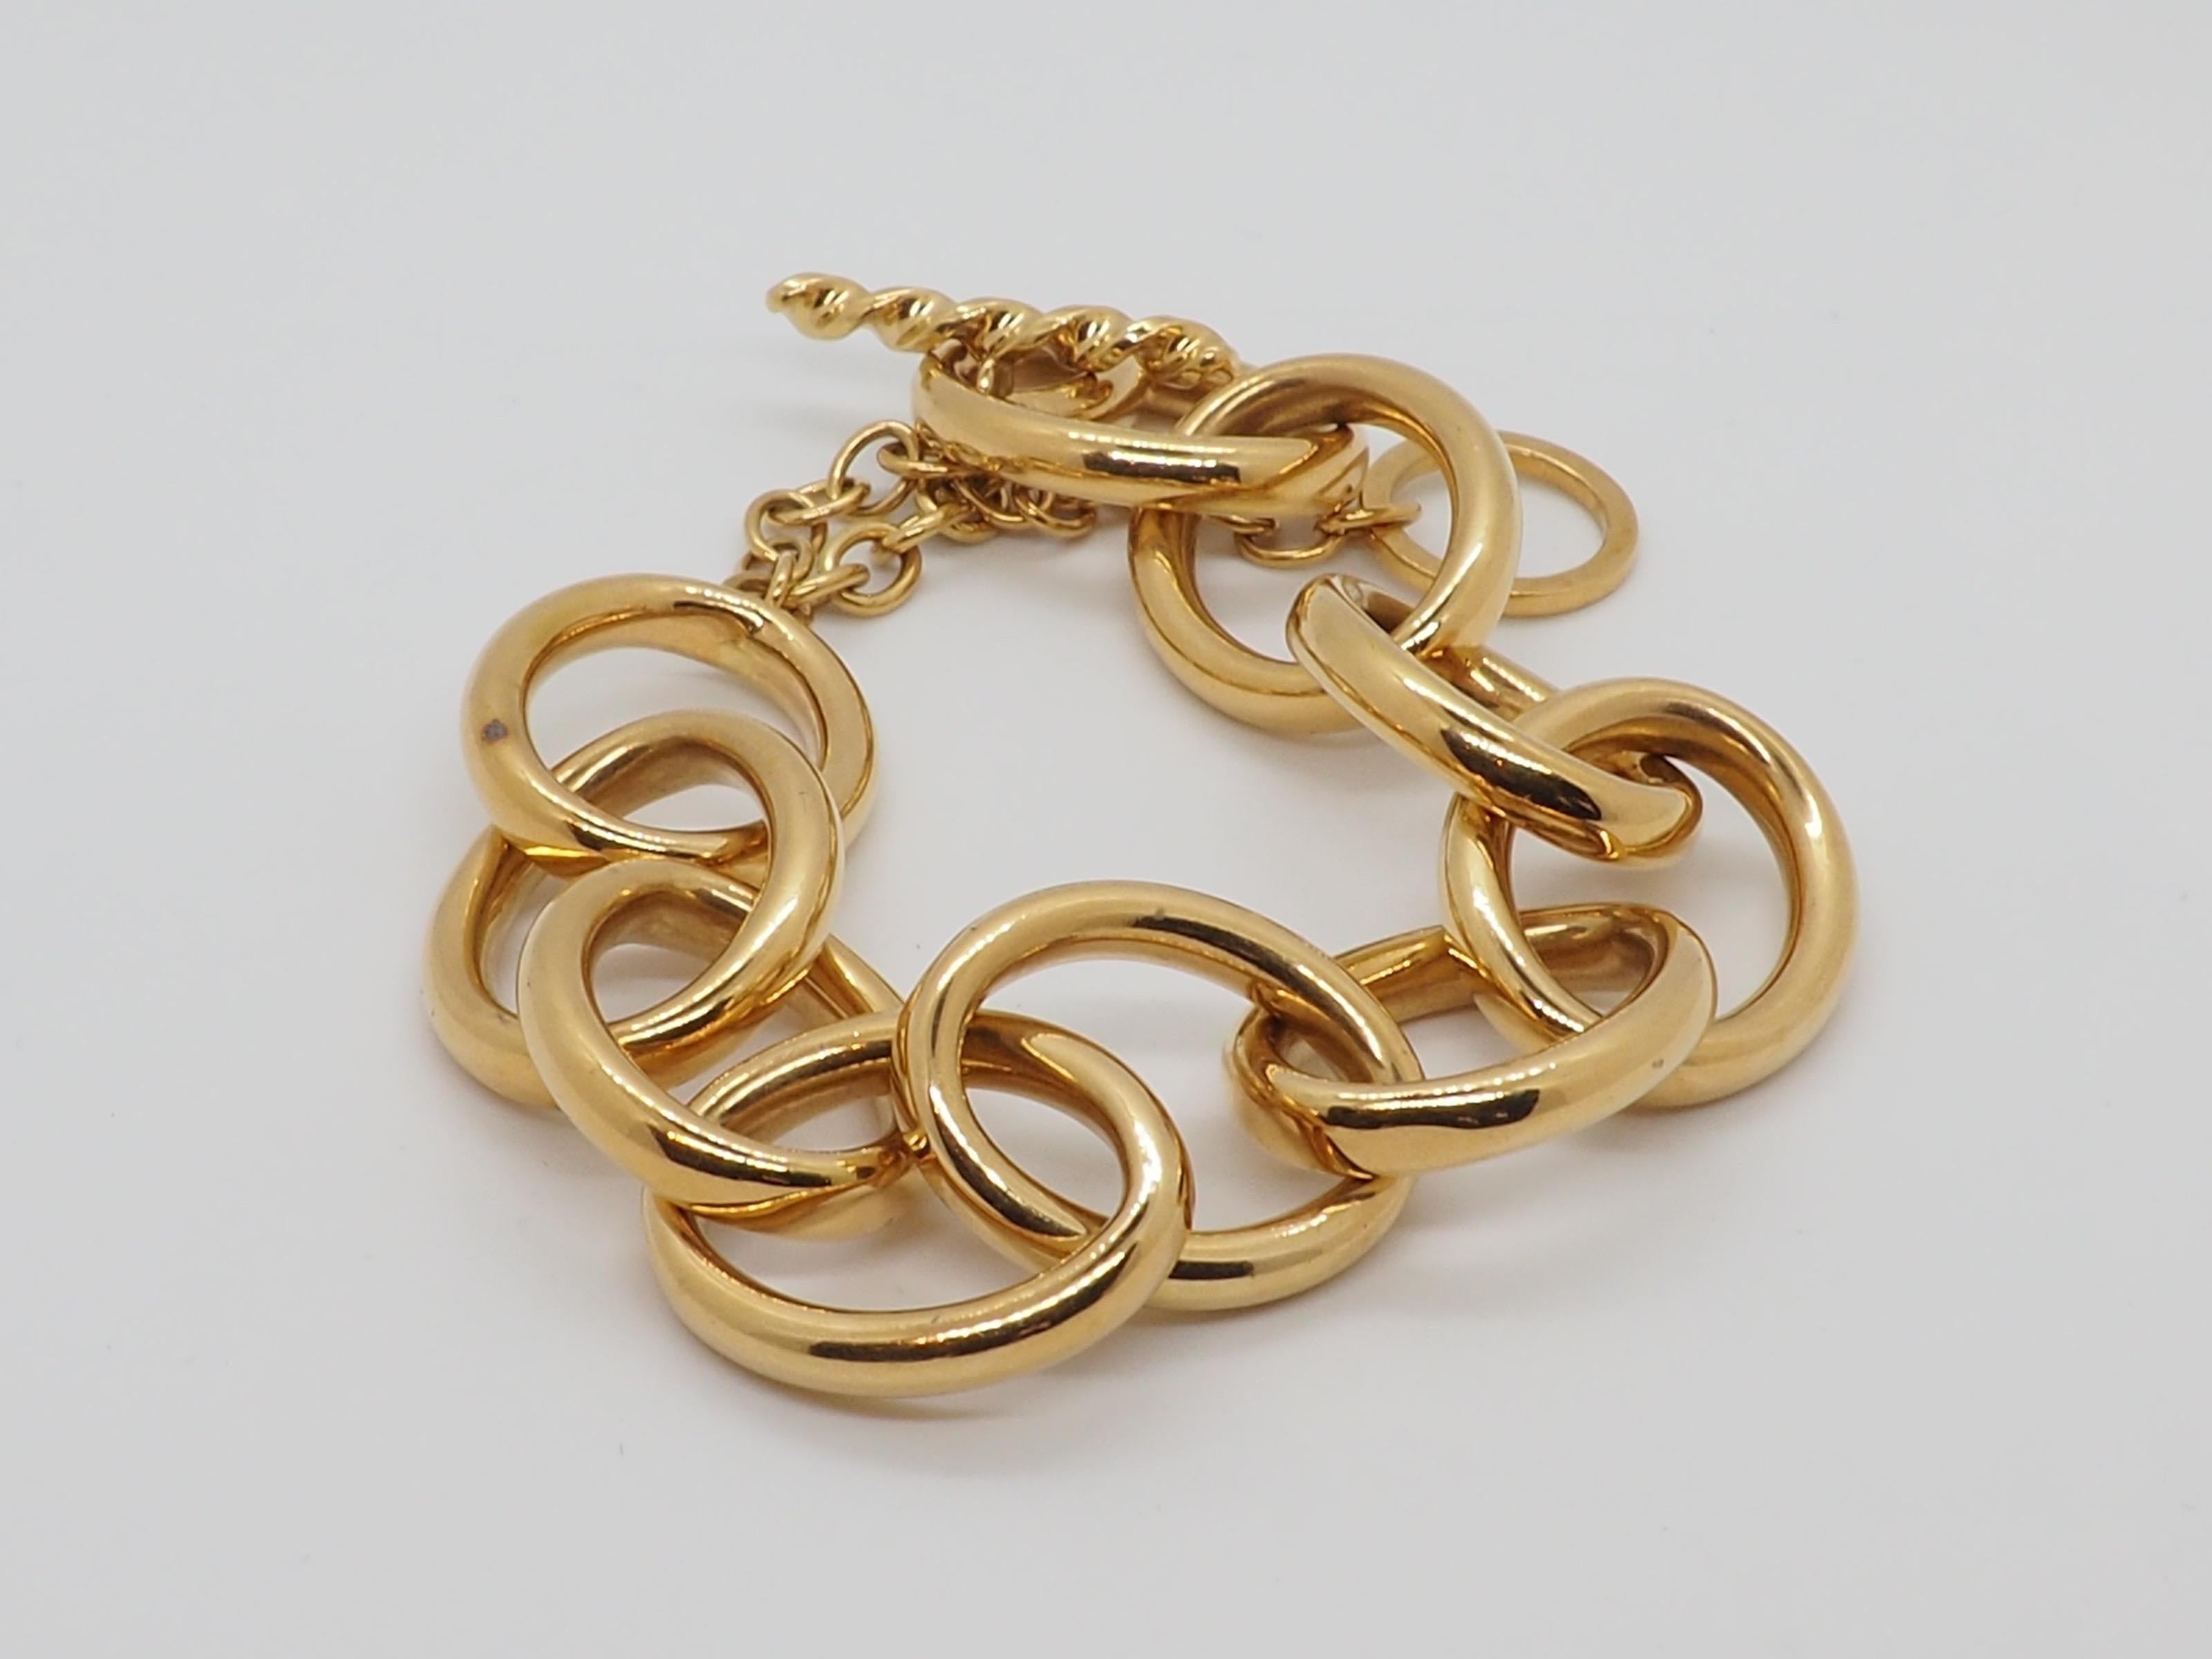 Massif retro chain bracelet crafted in 18K yellow gold. The in the form of oval-shaped rings. Perfectly complement any look and suitable with any outfit : the cocktail dress, office suit or the jeans with a T-shirt.

Total Weight: 63.1 grams
Length